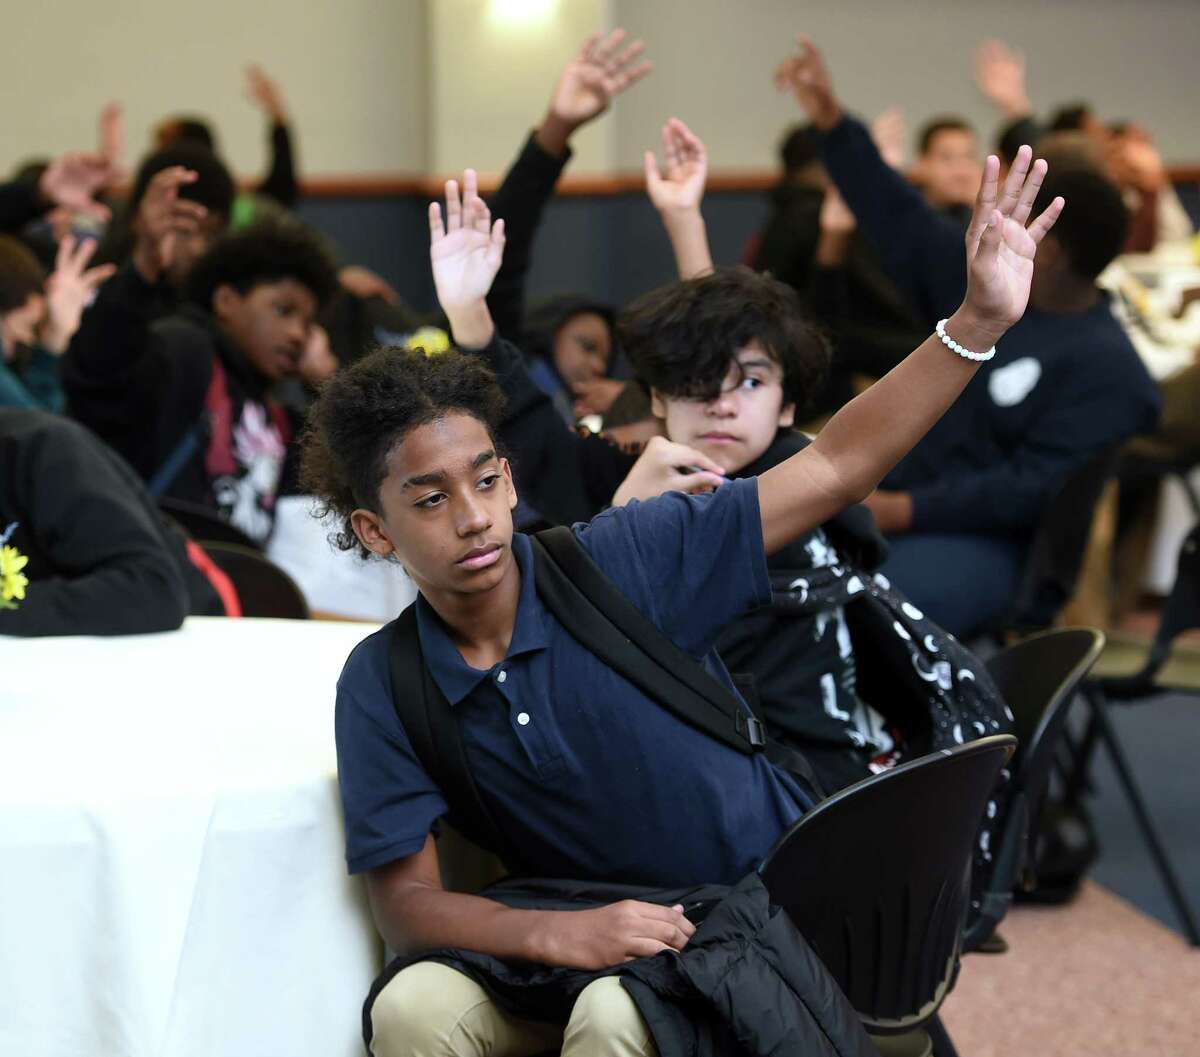 Students from New Haven and Hamden attend the 2nd annual Black & Brown Male Empowerment Conference at Southern Connecticut State University in New Haven on Oct. 4, 2022.